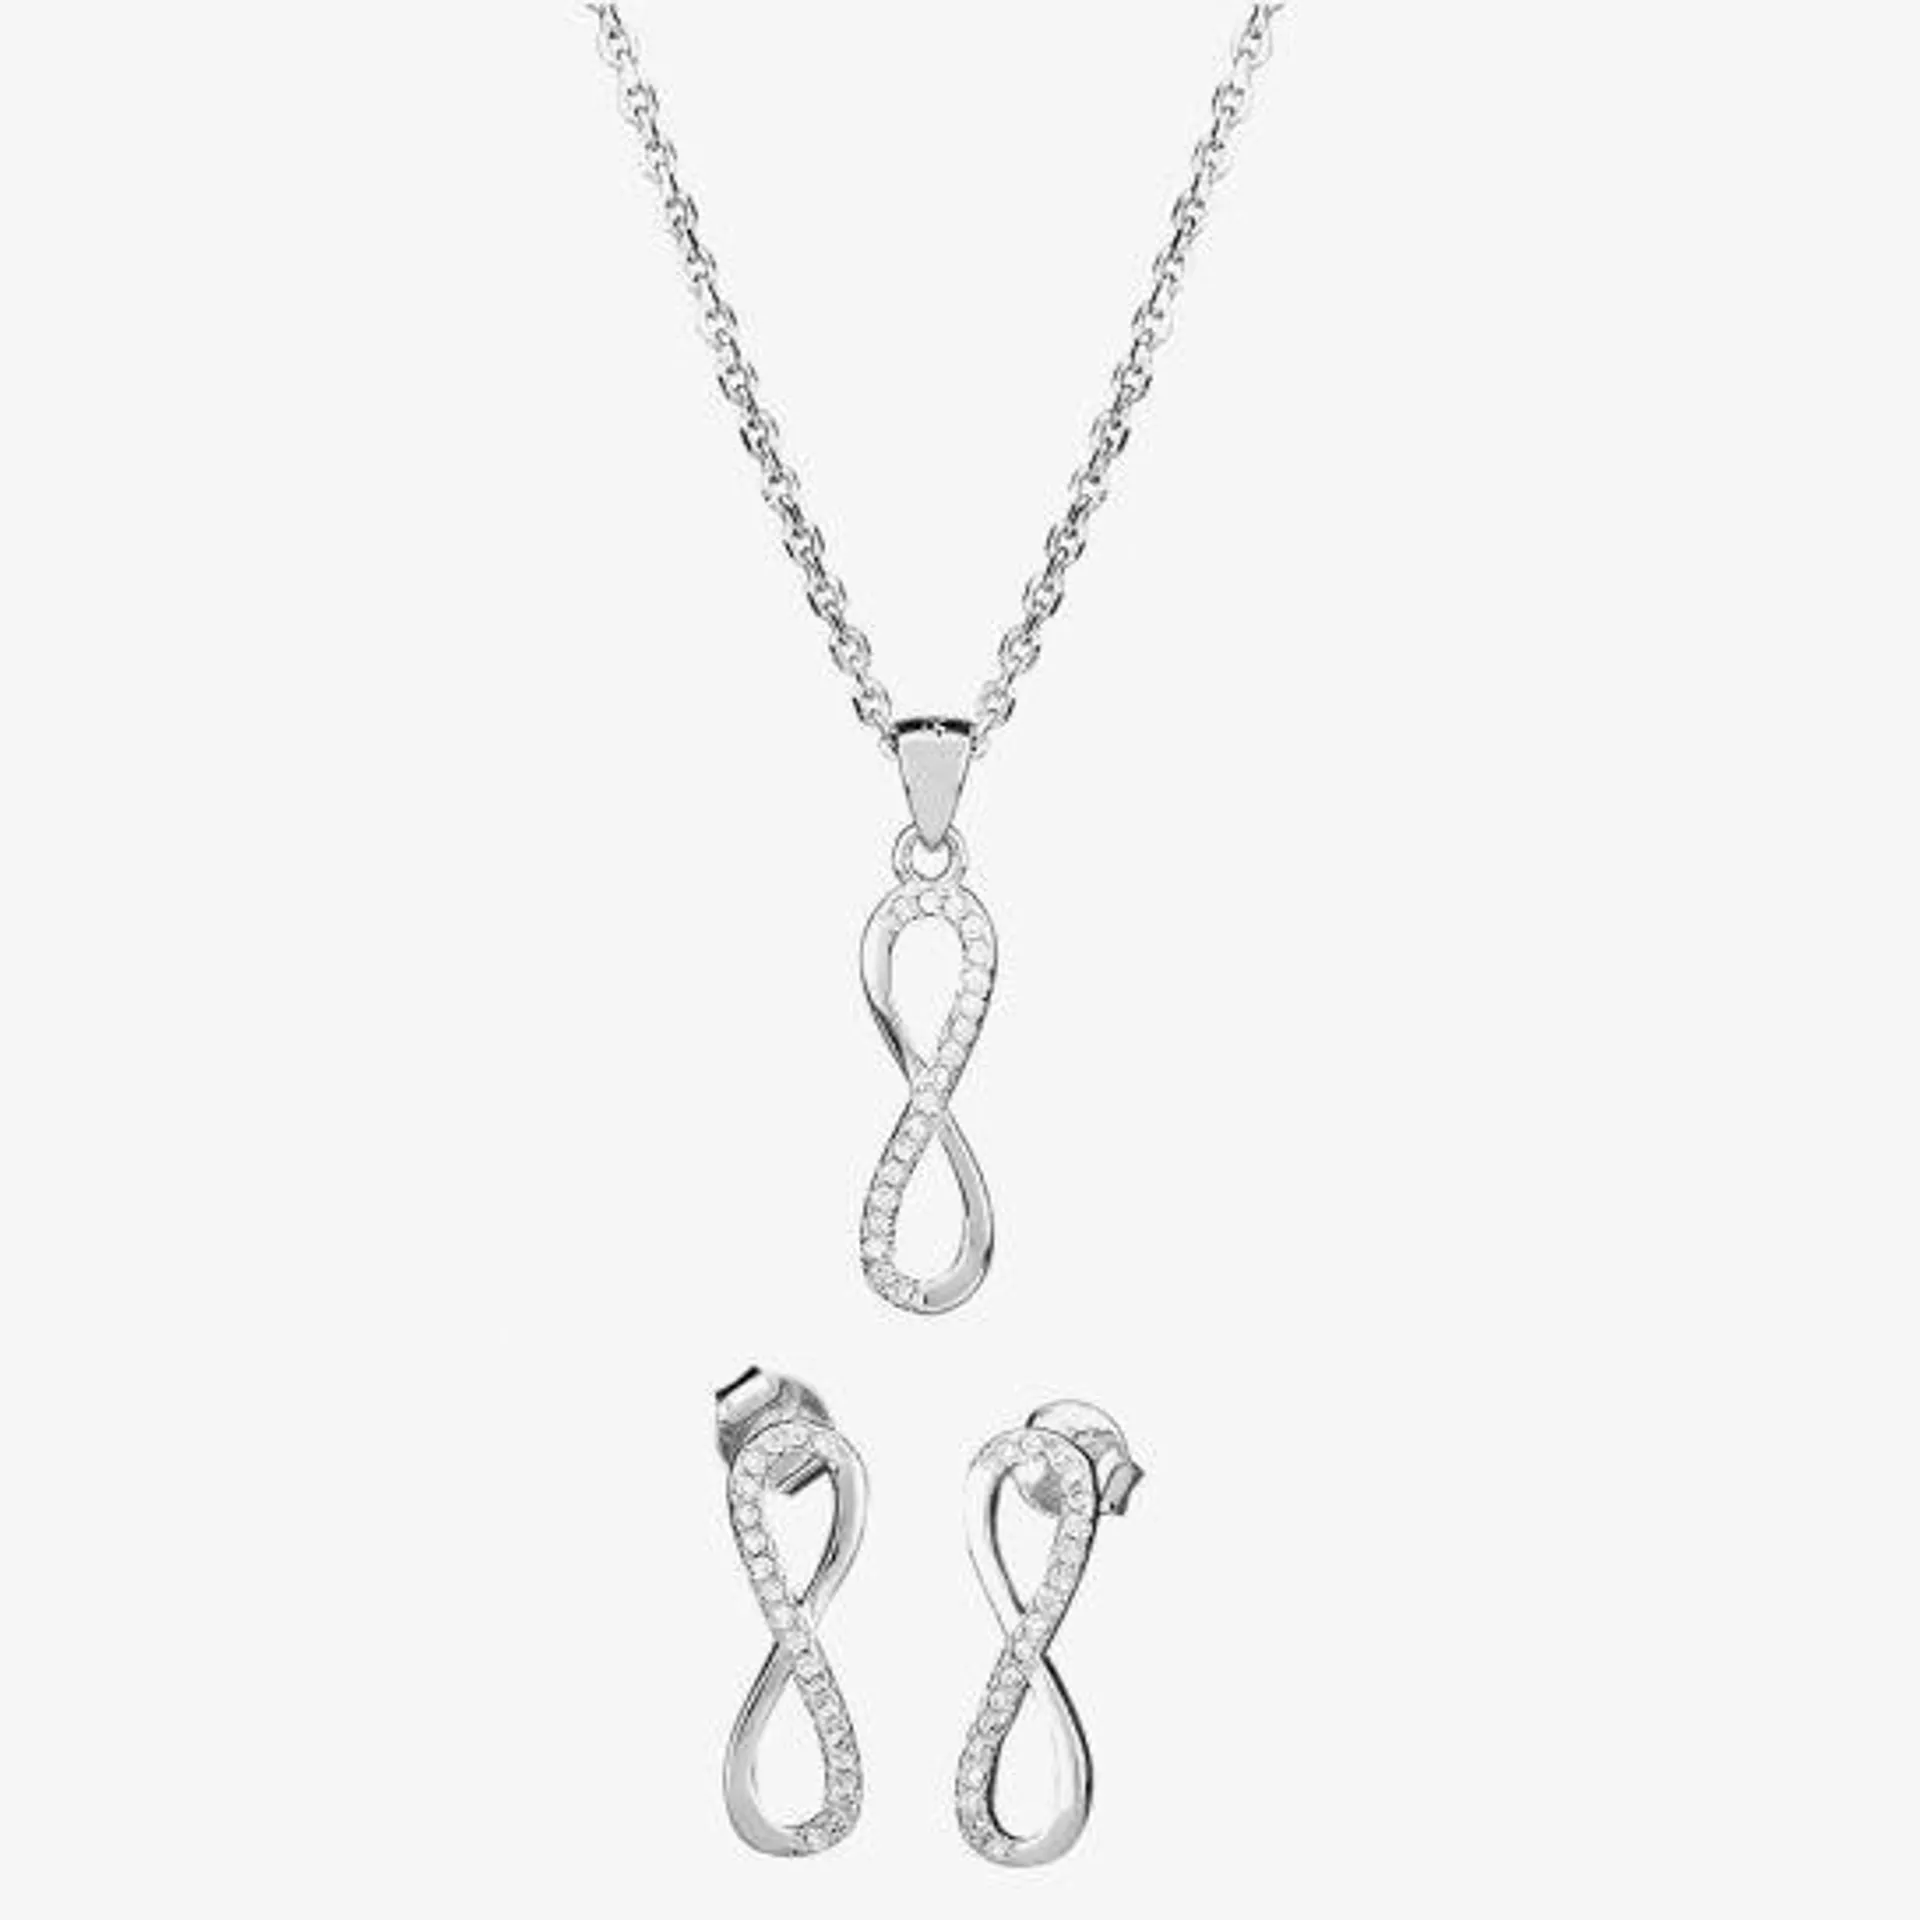 Silver Cubic Zirconia Infinity Pendant and Earrings Set SET12197